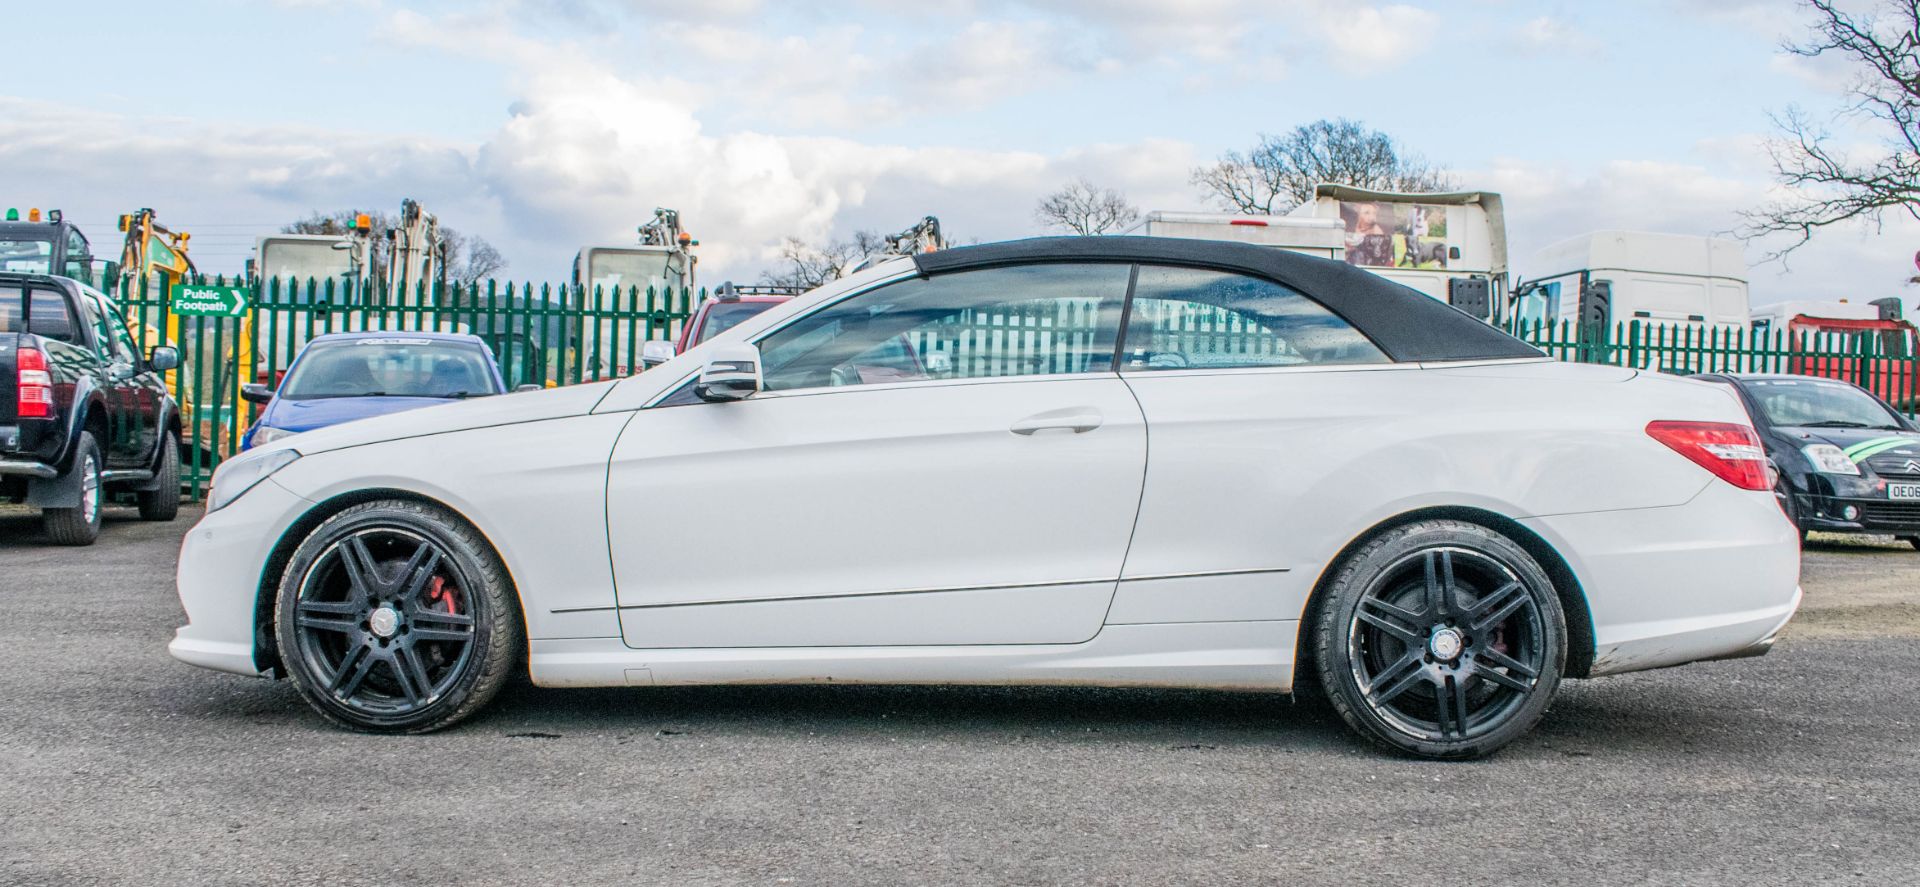 Mercedes Benz E250 sport CDI diesel convertible car Registration number: WP12 OLO Date of - Image 7 of 20